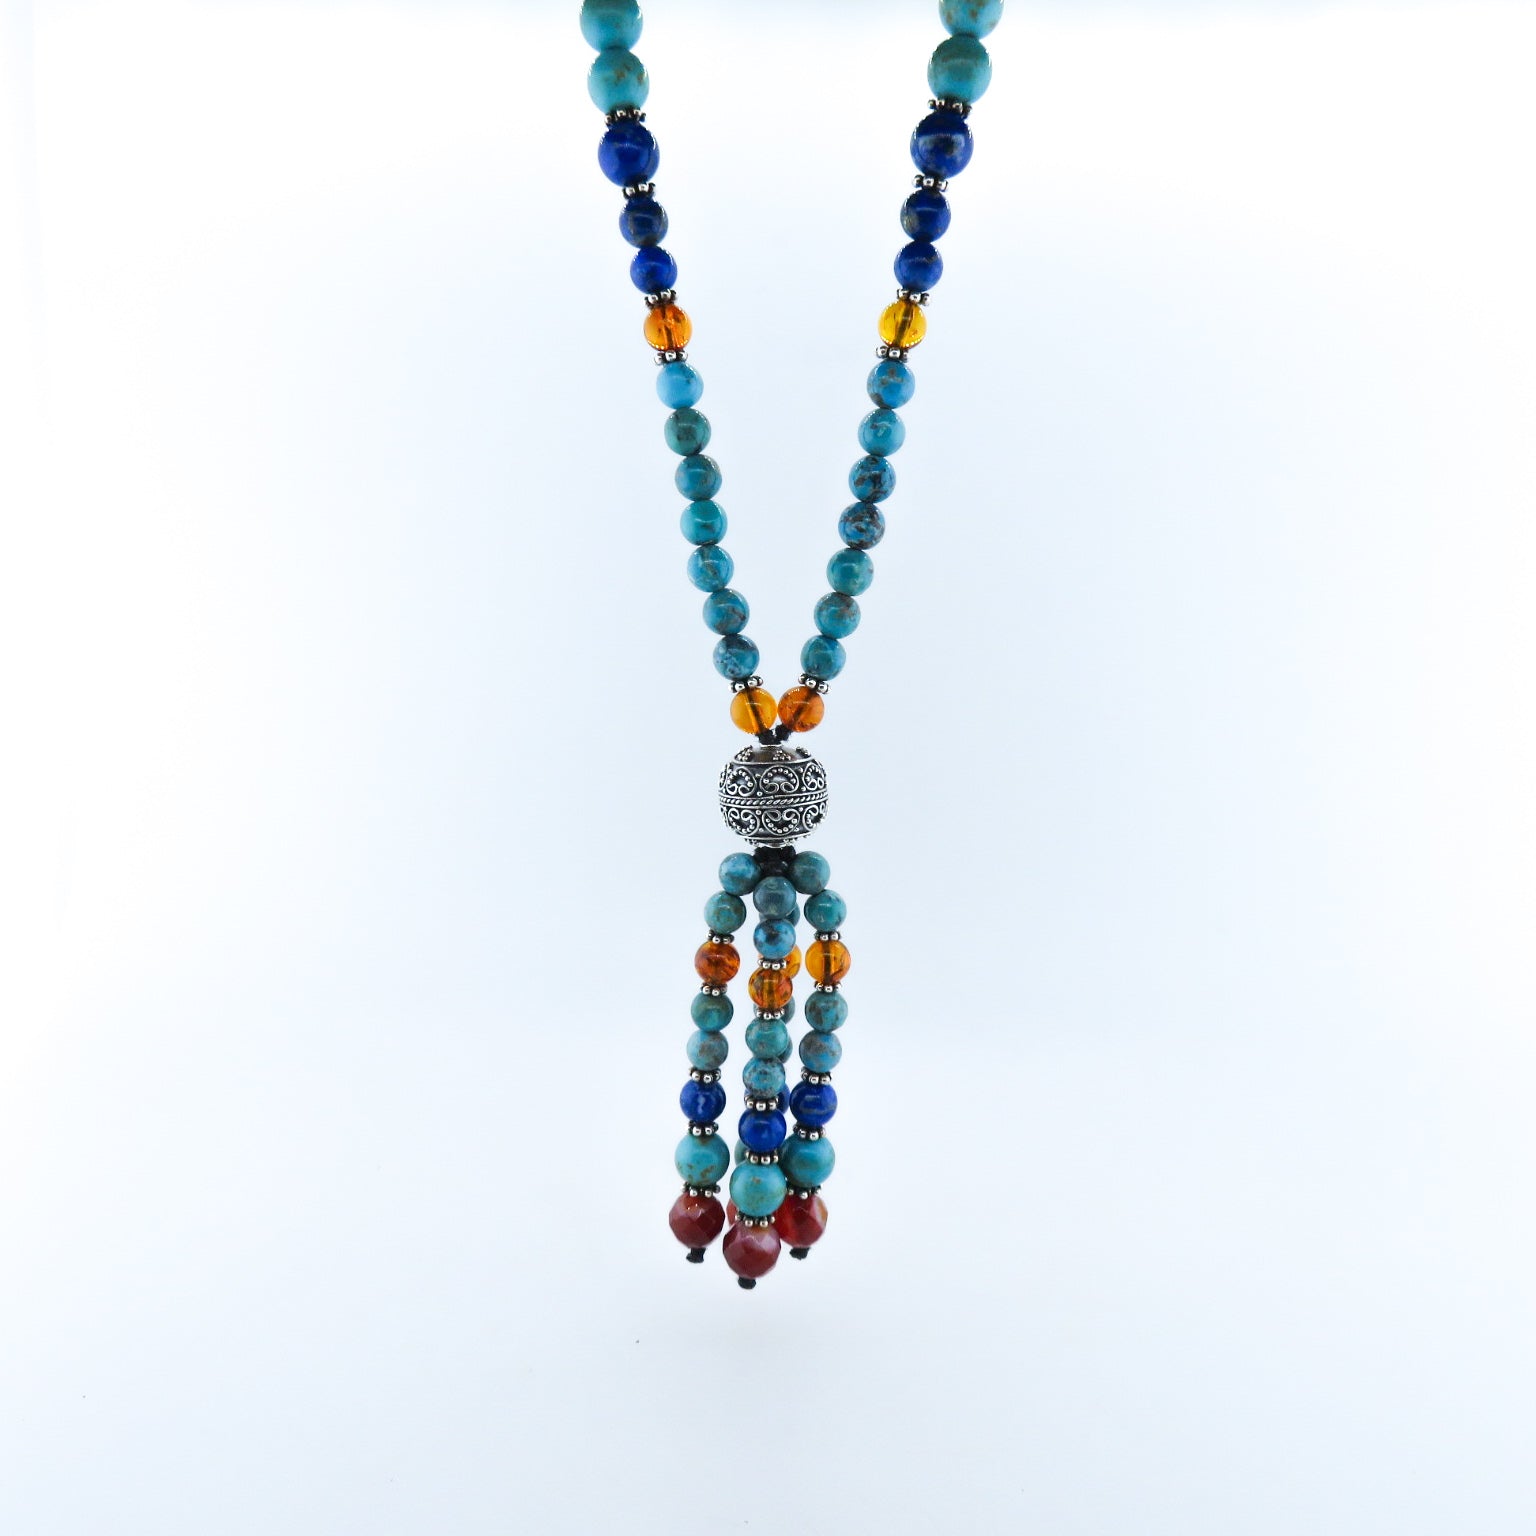 Turquoise Beads Necklace with Carnelian, Lapis Lazuli, Amber and Silver Beads